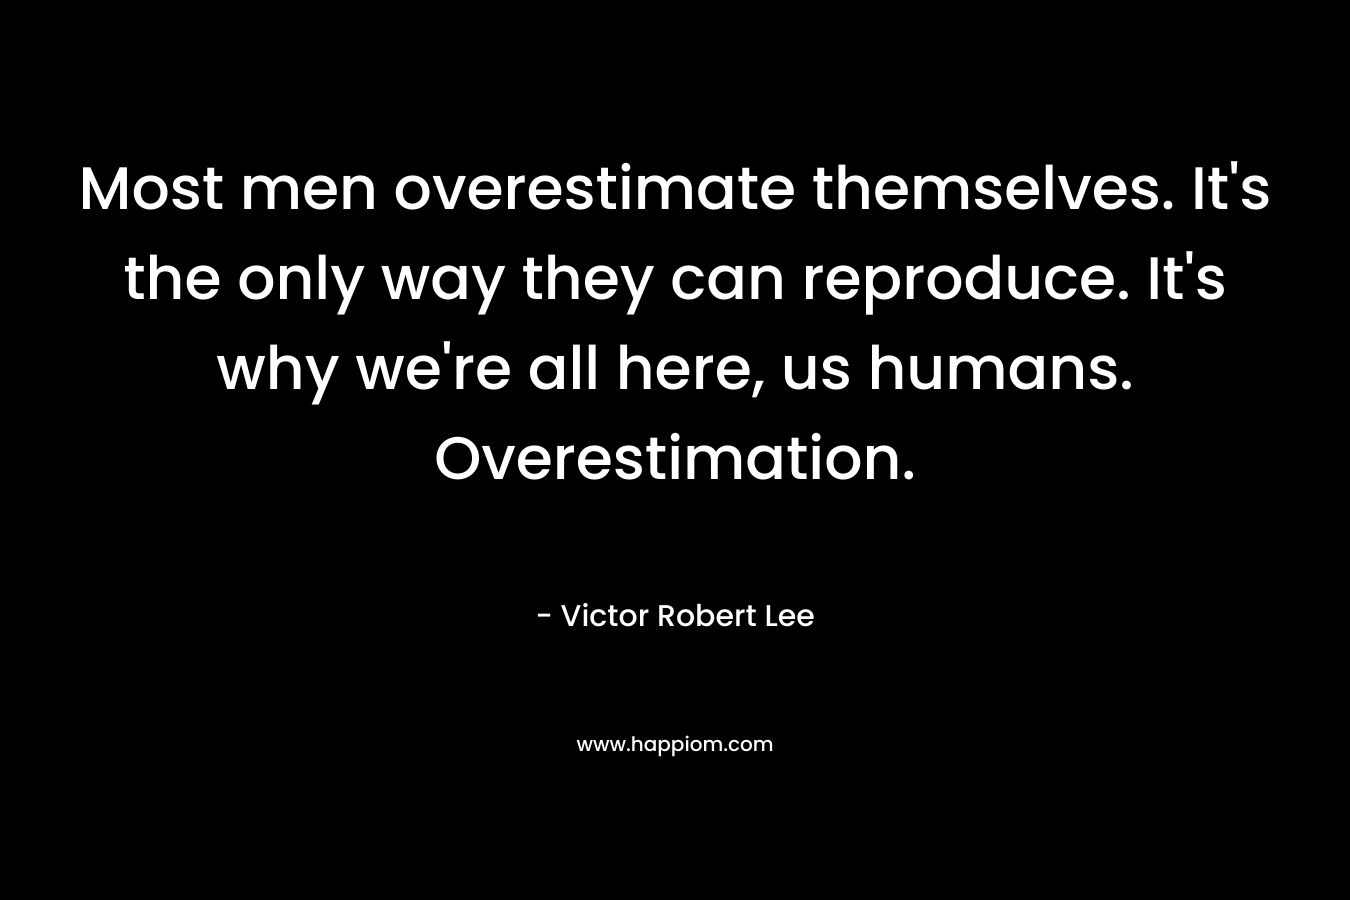 Most men overestimate themselves. It’s the only way they can reproduce. It’s why we’re all here, us humans. Overestimation. – Victor Robert Lee